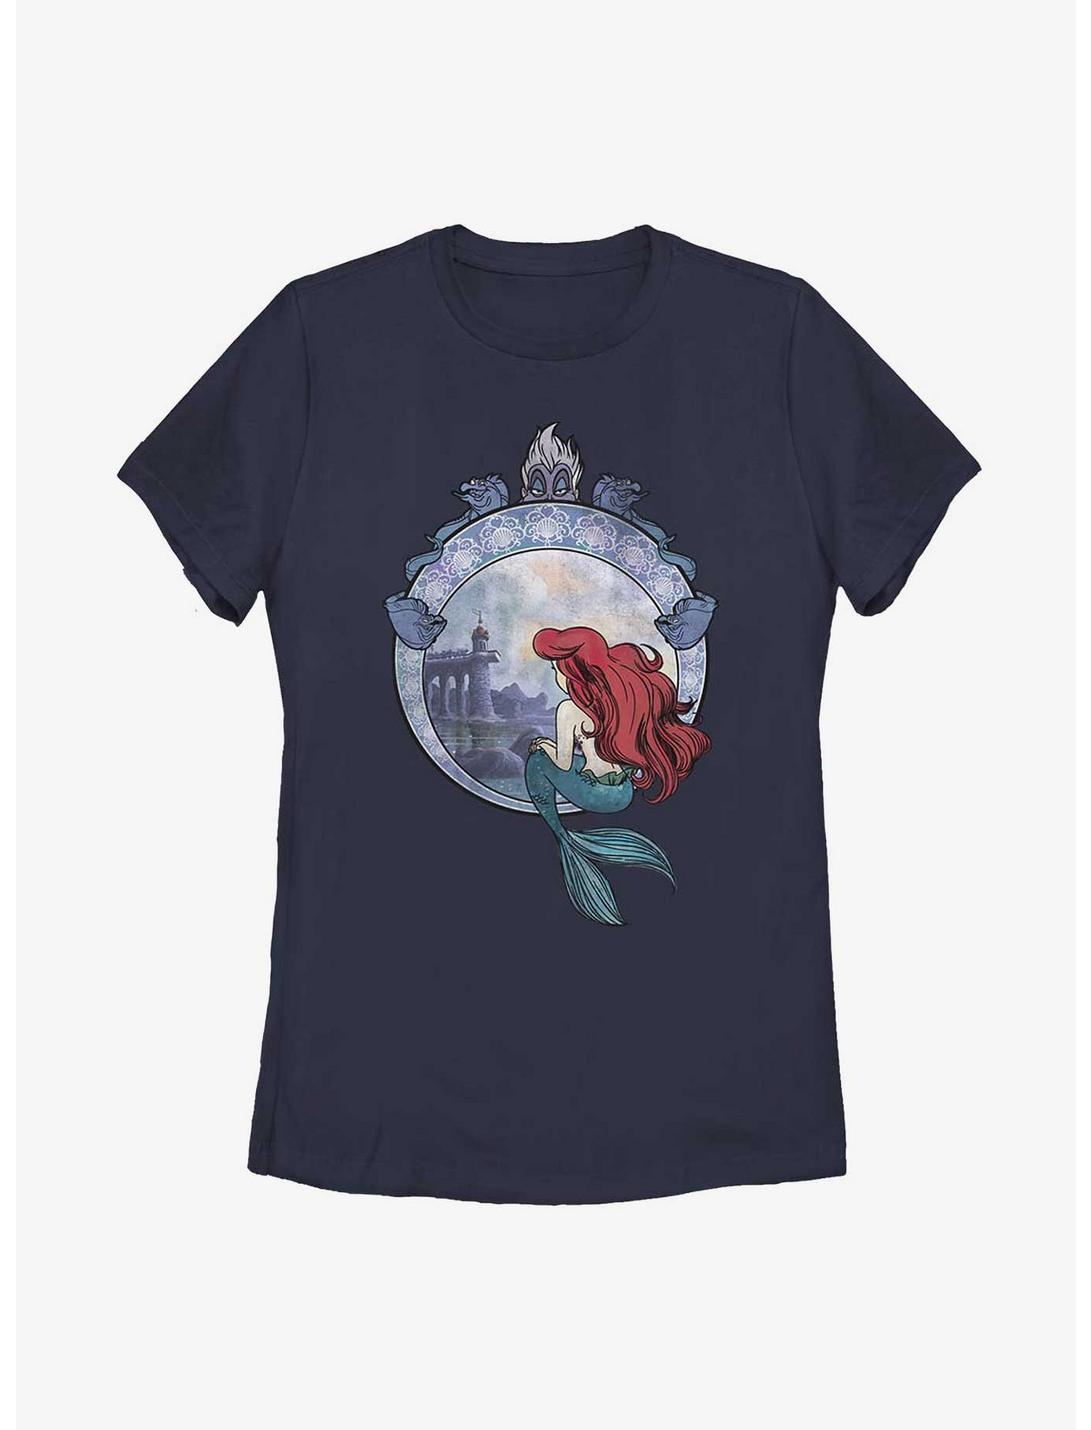 Disney The Little Mermaid Ariel Dreaming Of Your World Womens T-Shirt, NAVY, hi-res